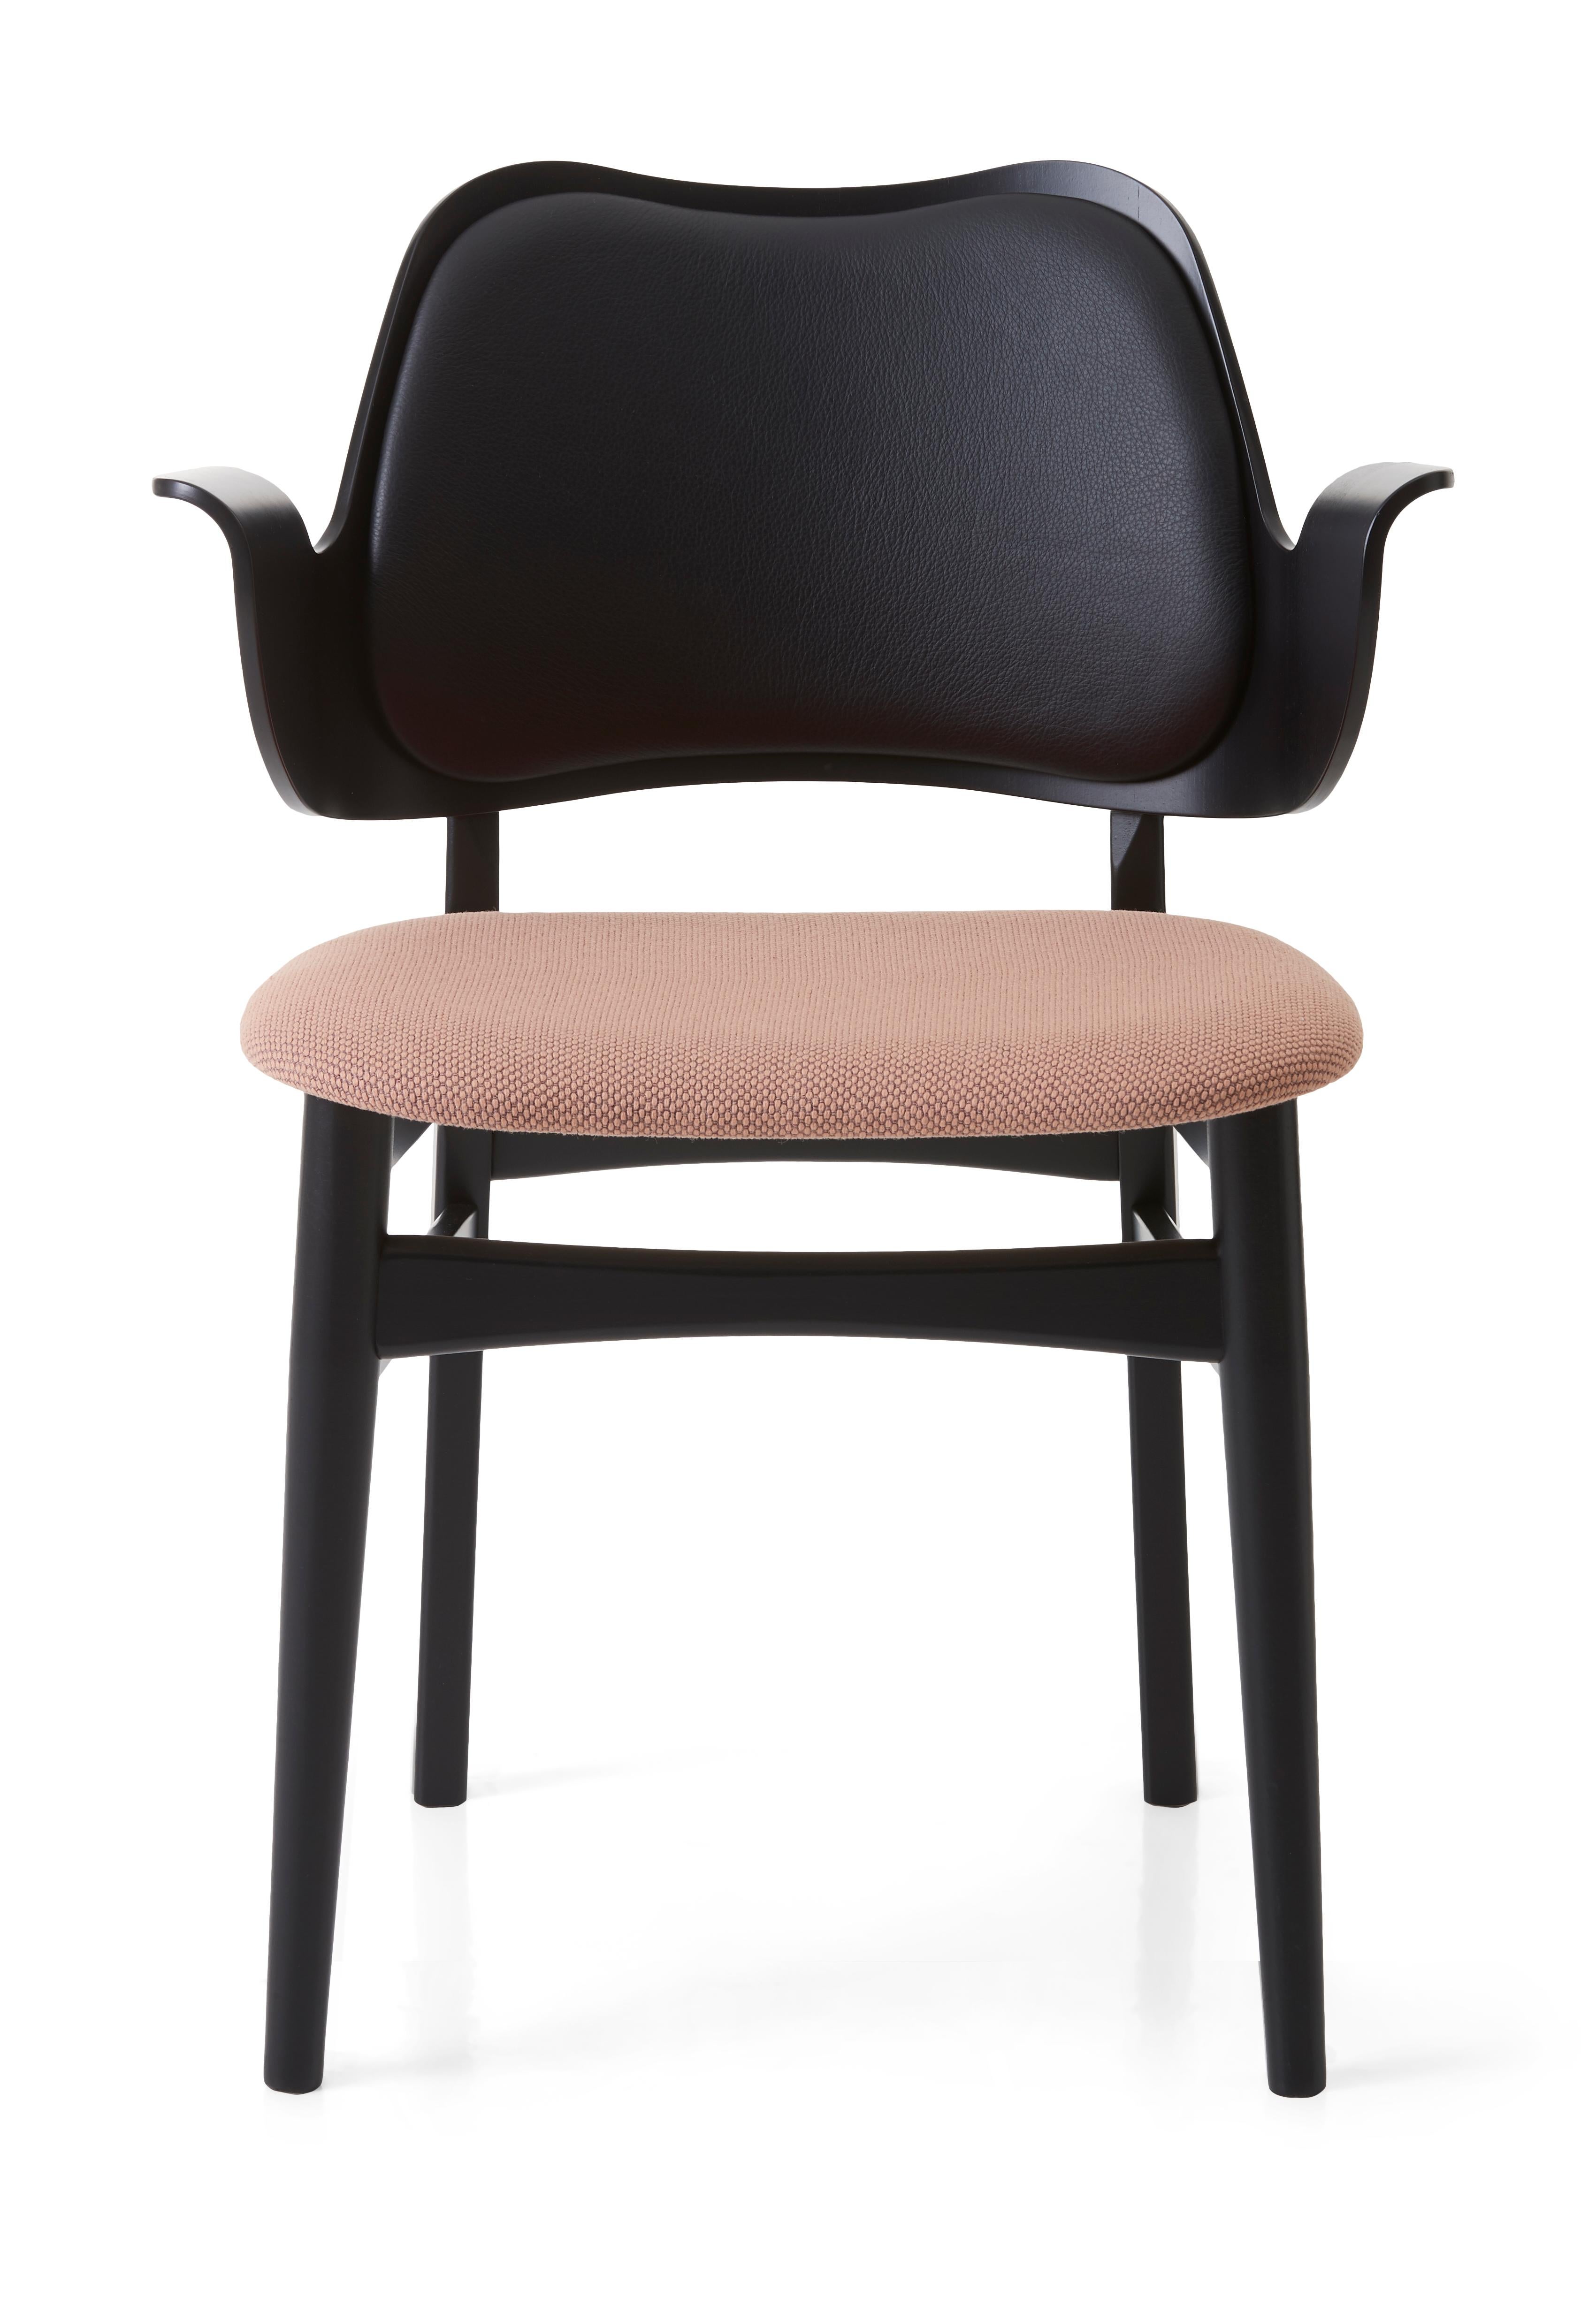 For Sale: Orange (Pres207,Merit035) Gesture Two-Tone Fully Upholstered Chair in Black, by Hans Olsen for Warm Nordic